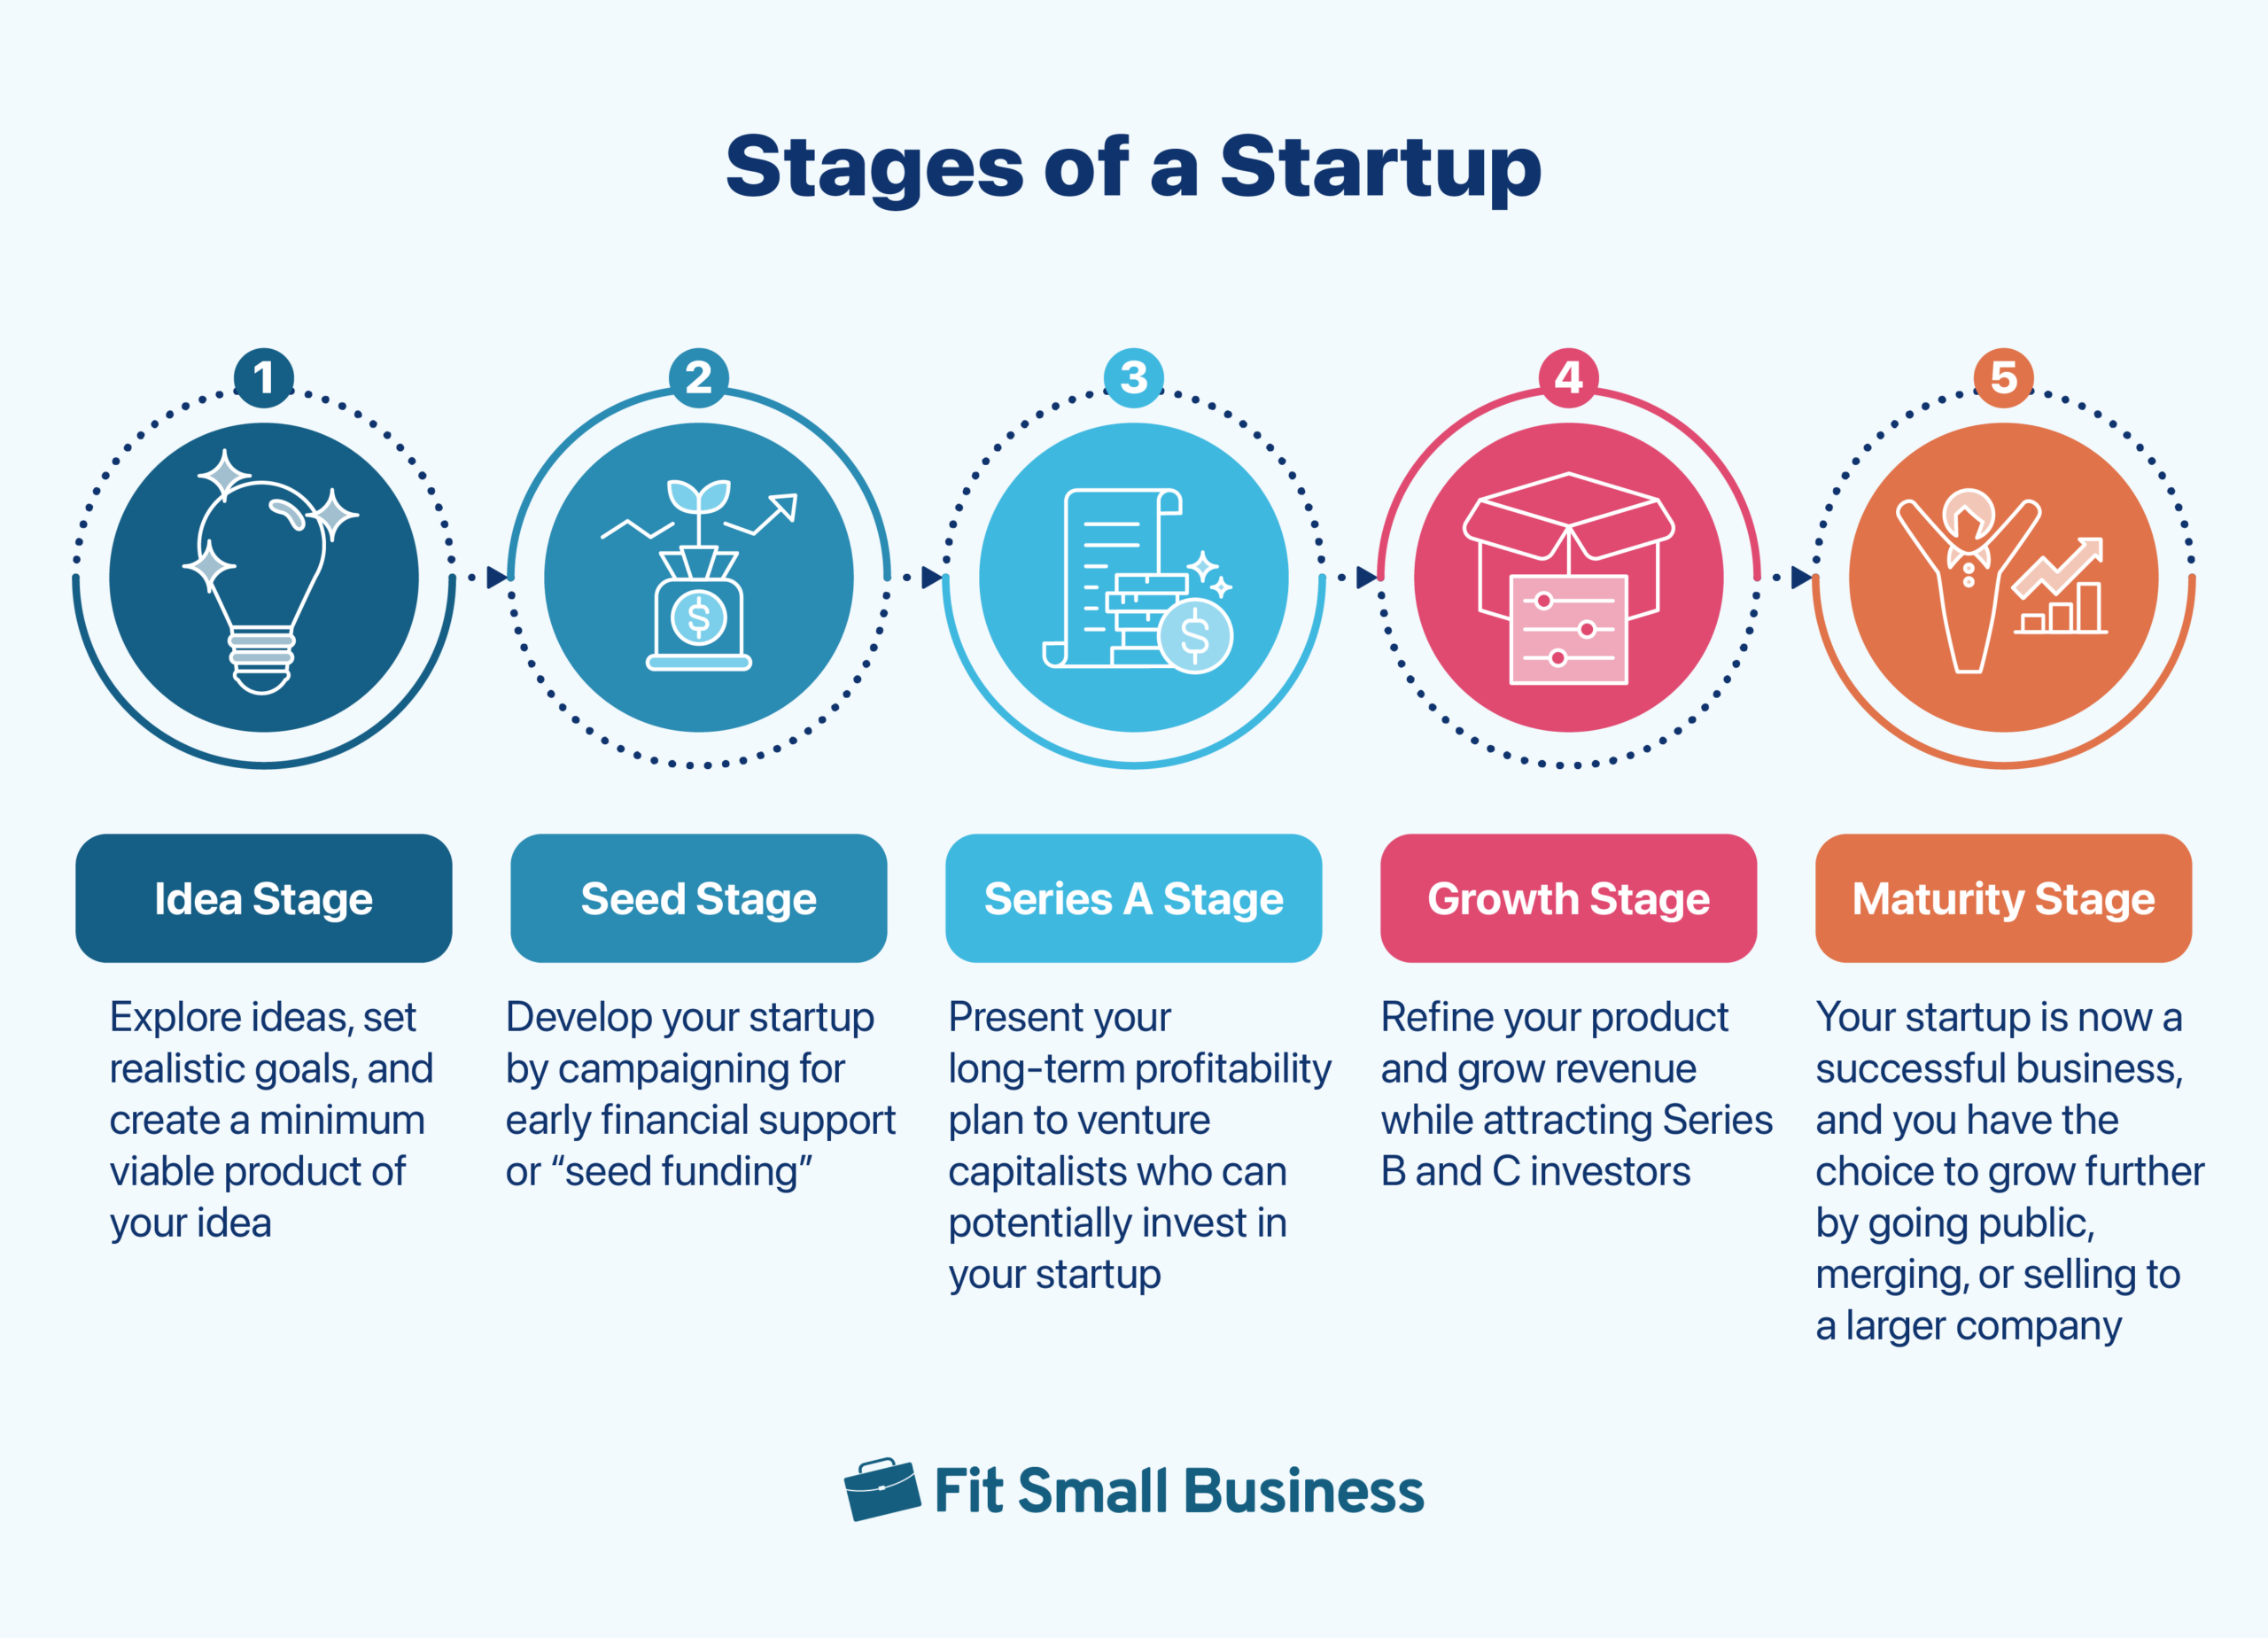 Process infographic of the five stages of a startup, from idea to maturity stages.